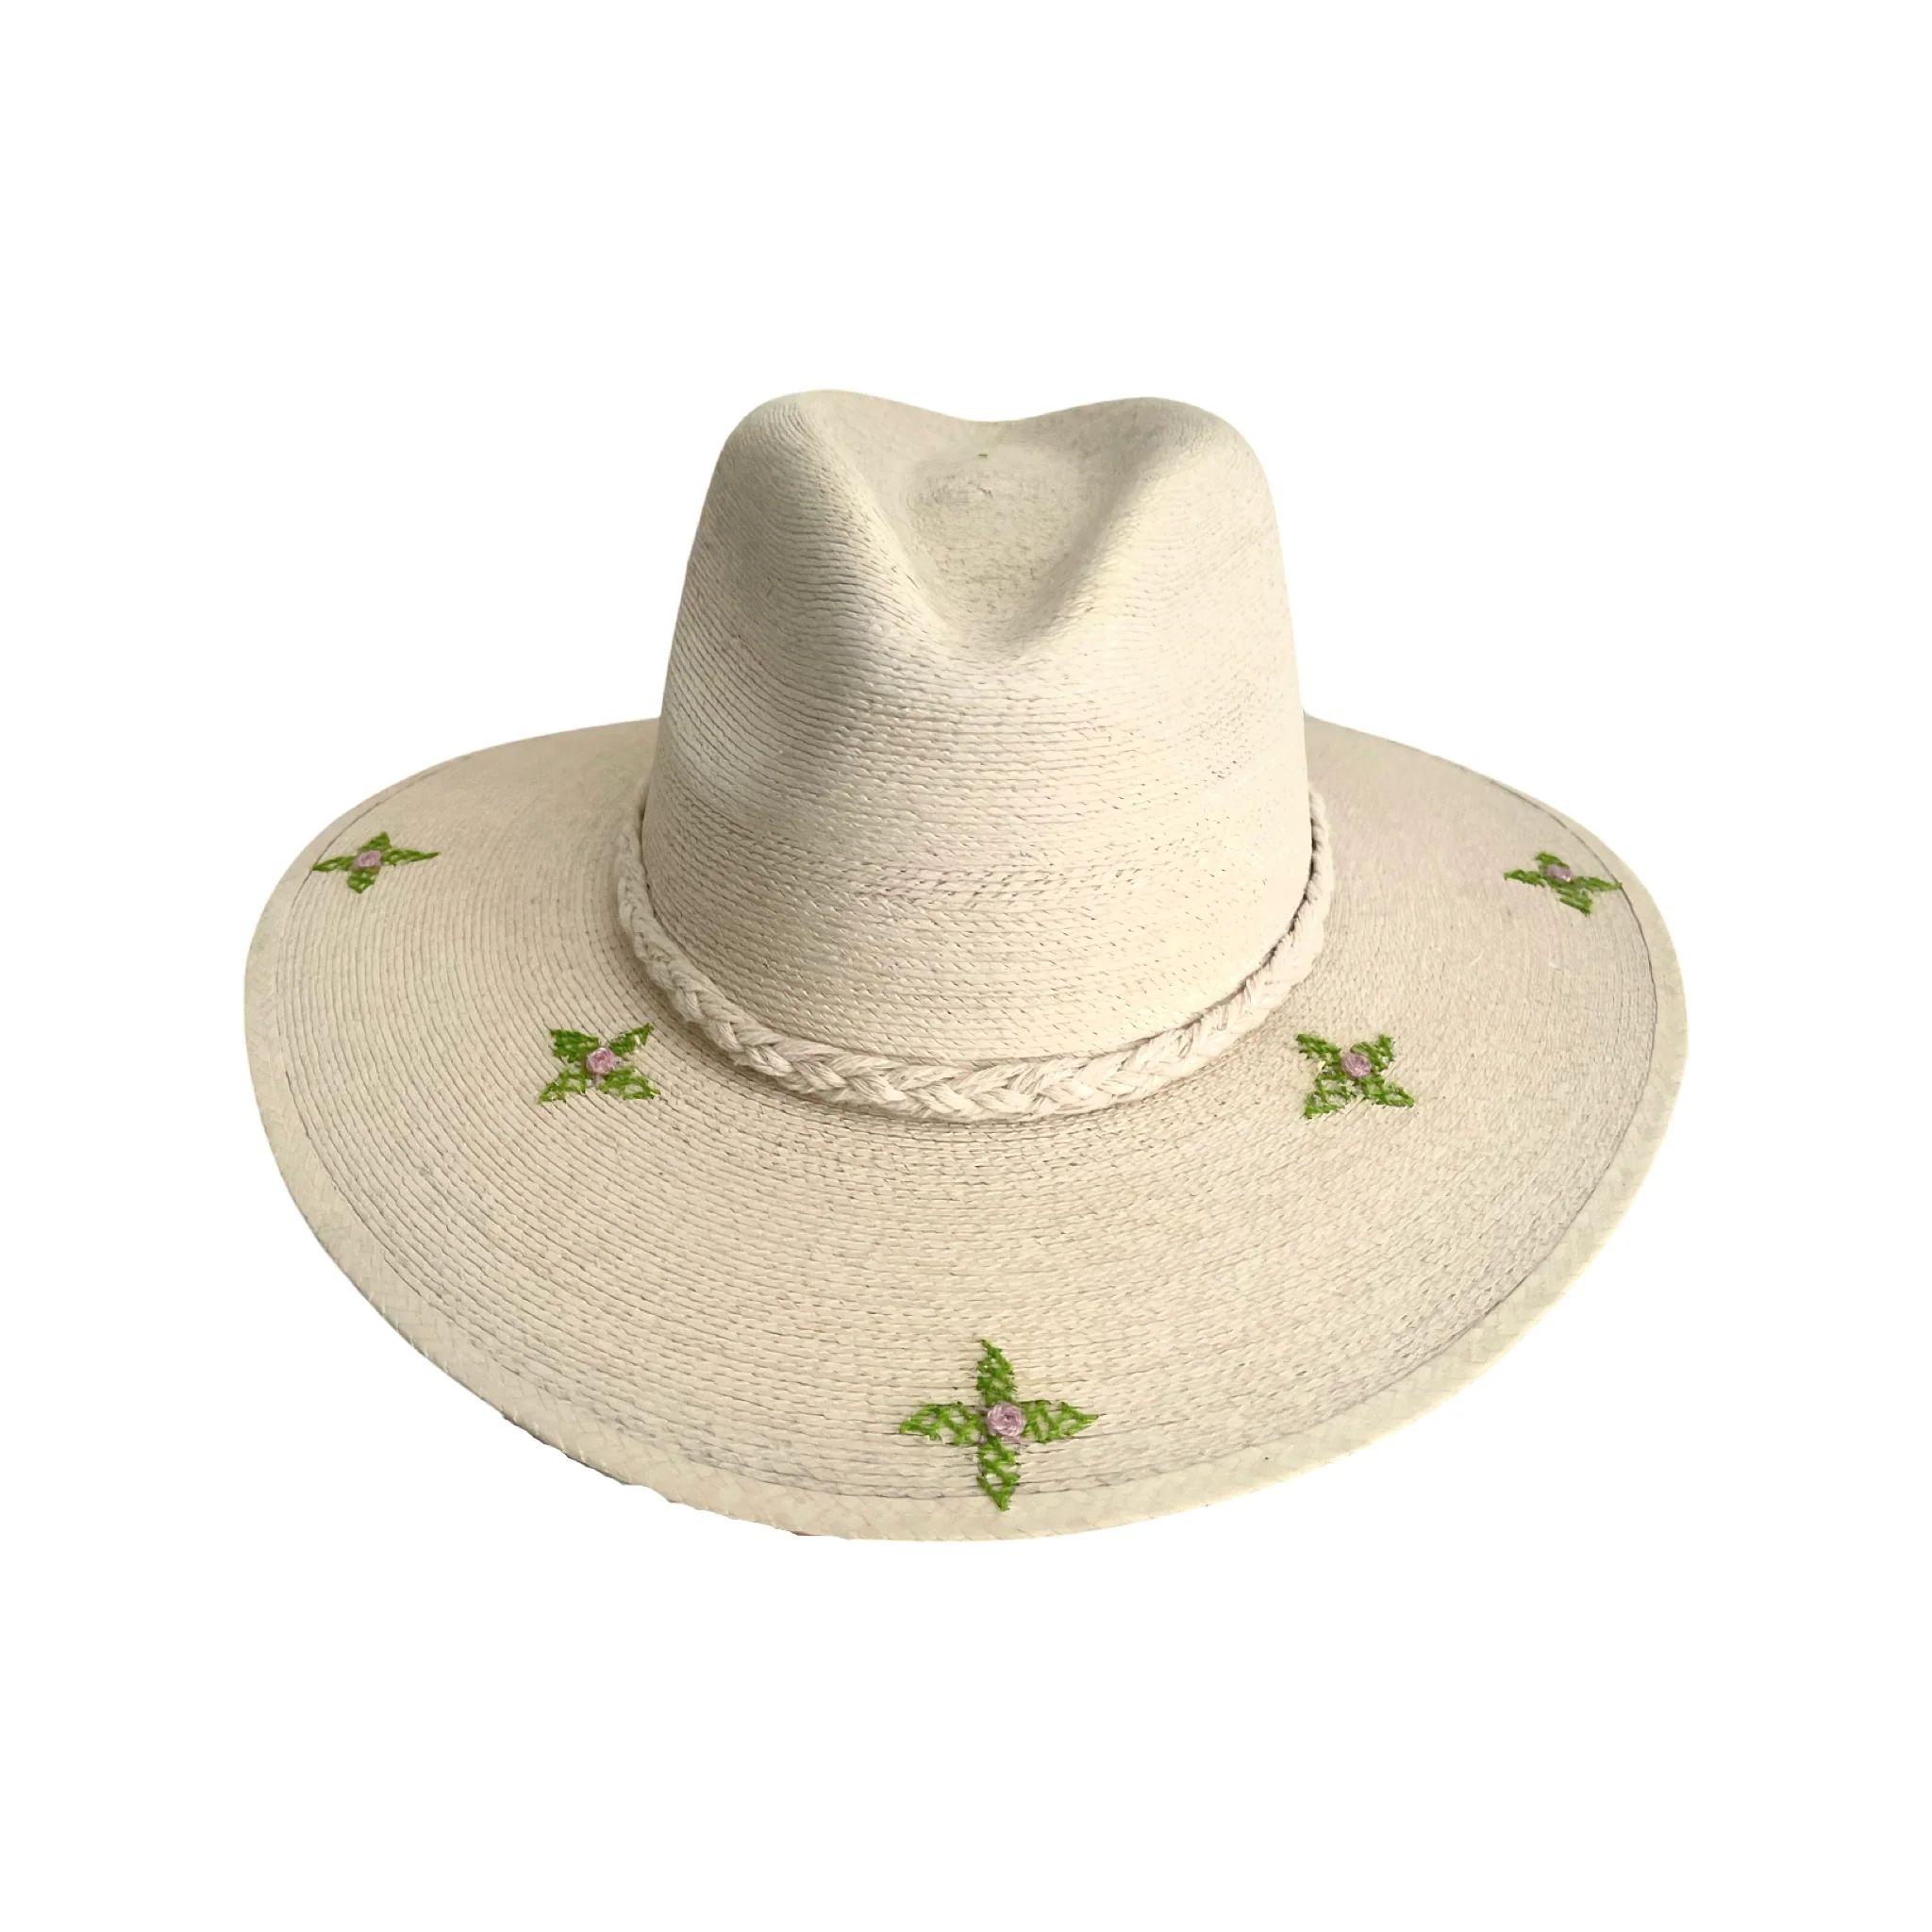 Exclusive Verde Floras Hat by Corazon Playero - Preorder | Support HerStory